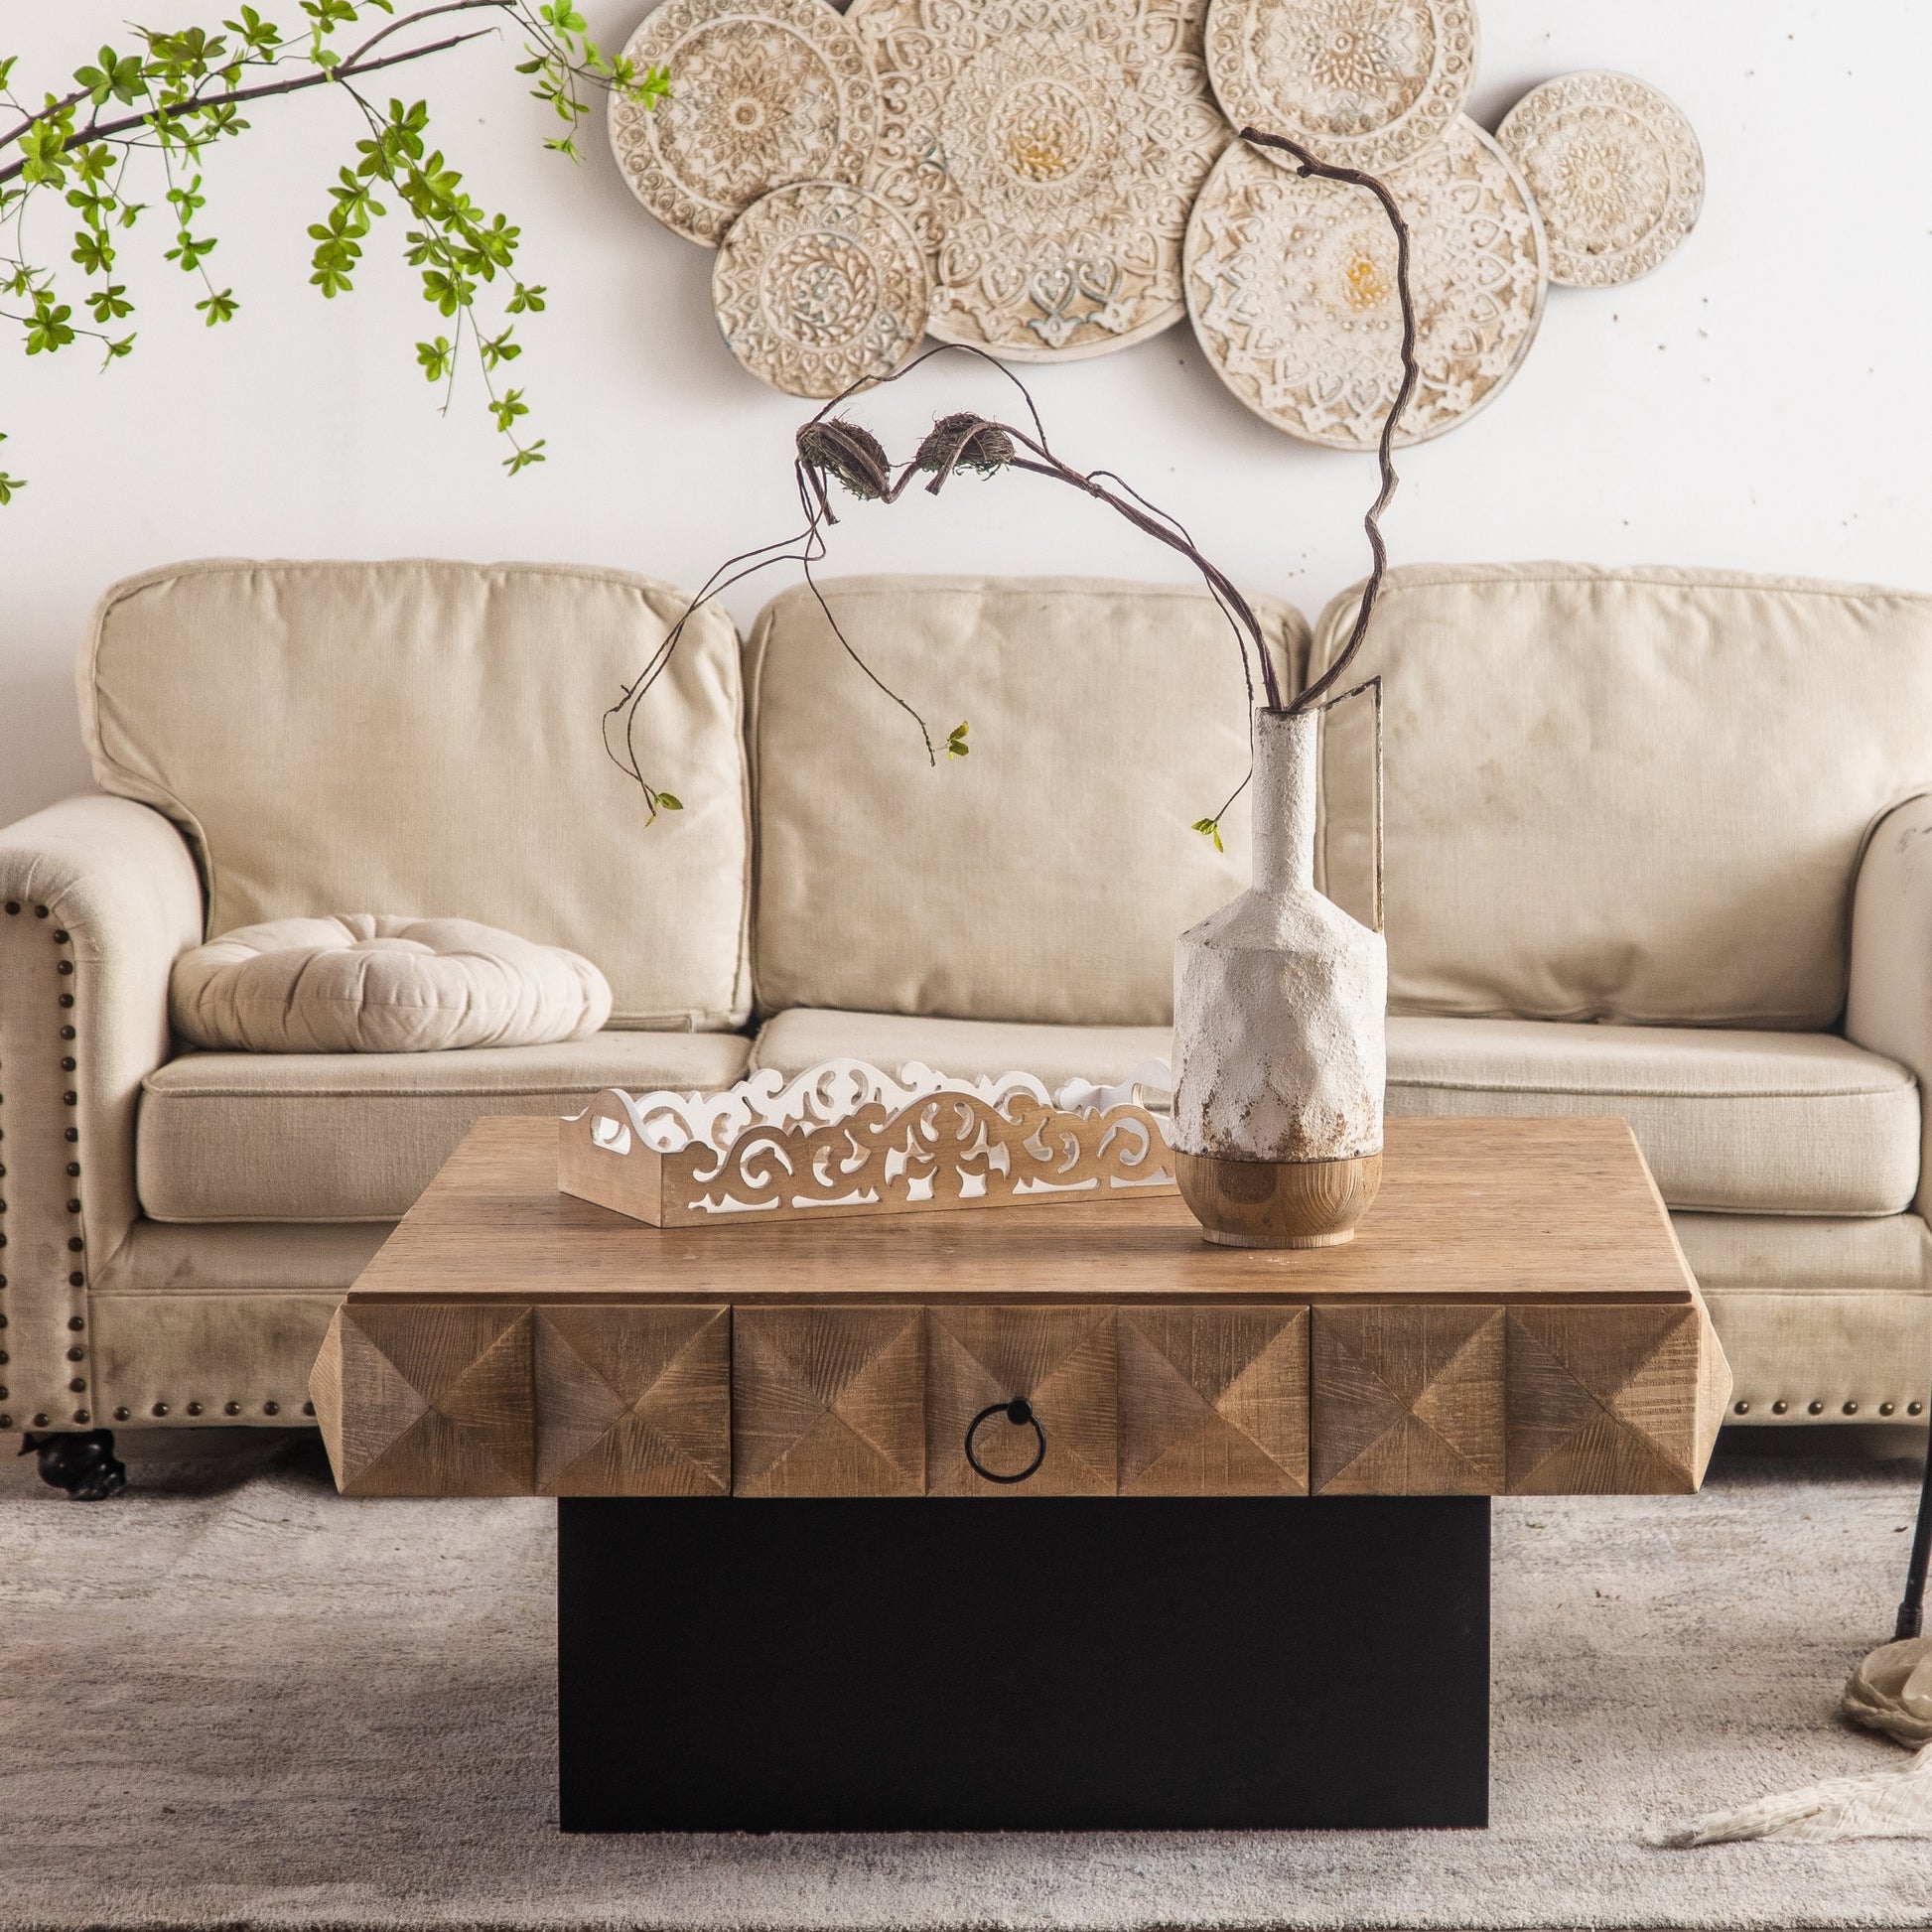 41.73"Three-dimensional Embossed  Pattern Square Retro Coffee Table with 2 Drawers and MDF Base - Enova Luxe Home Store